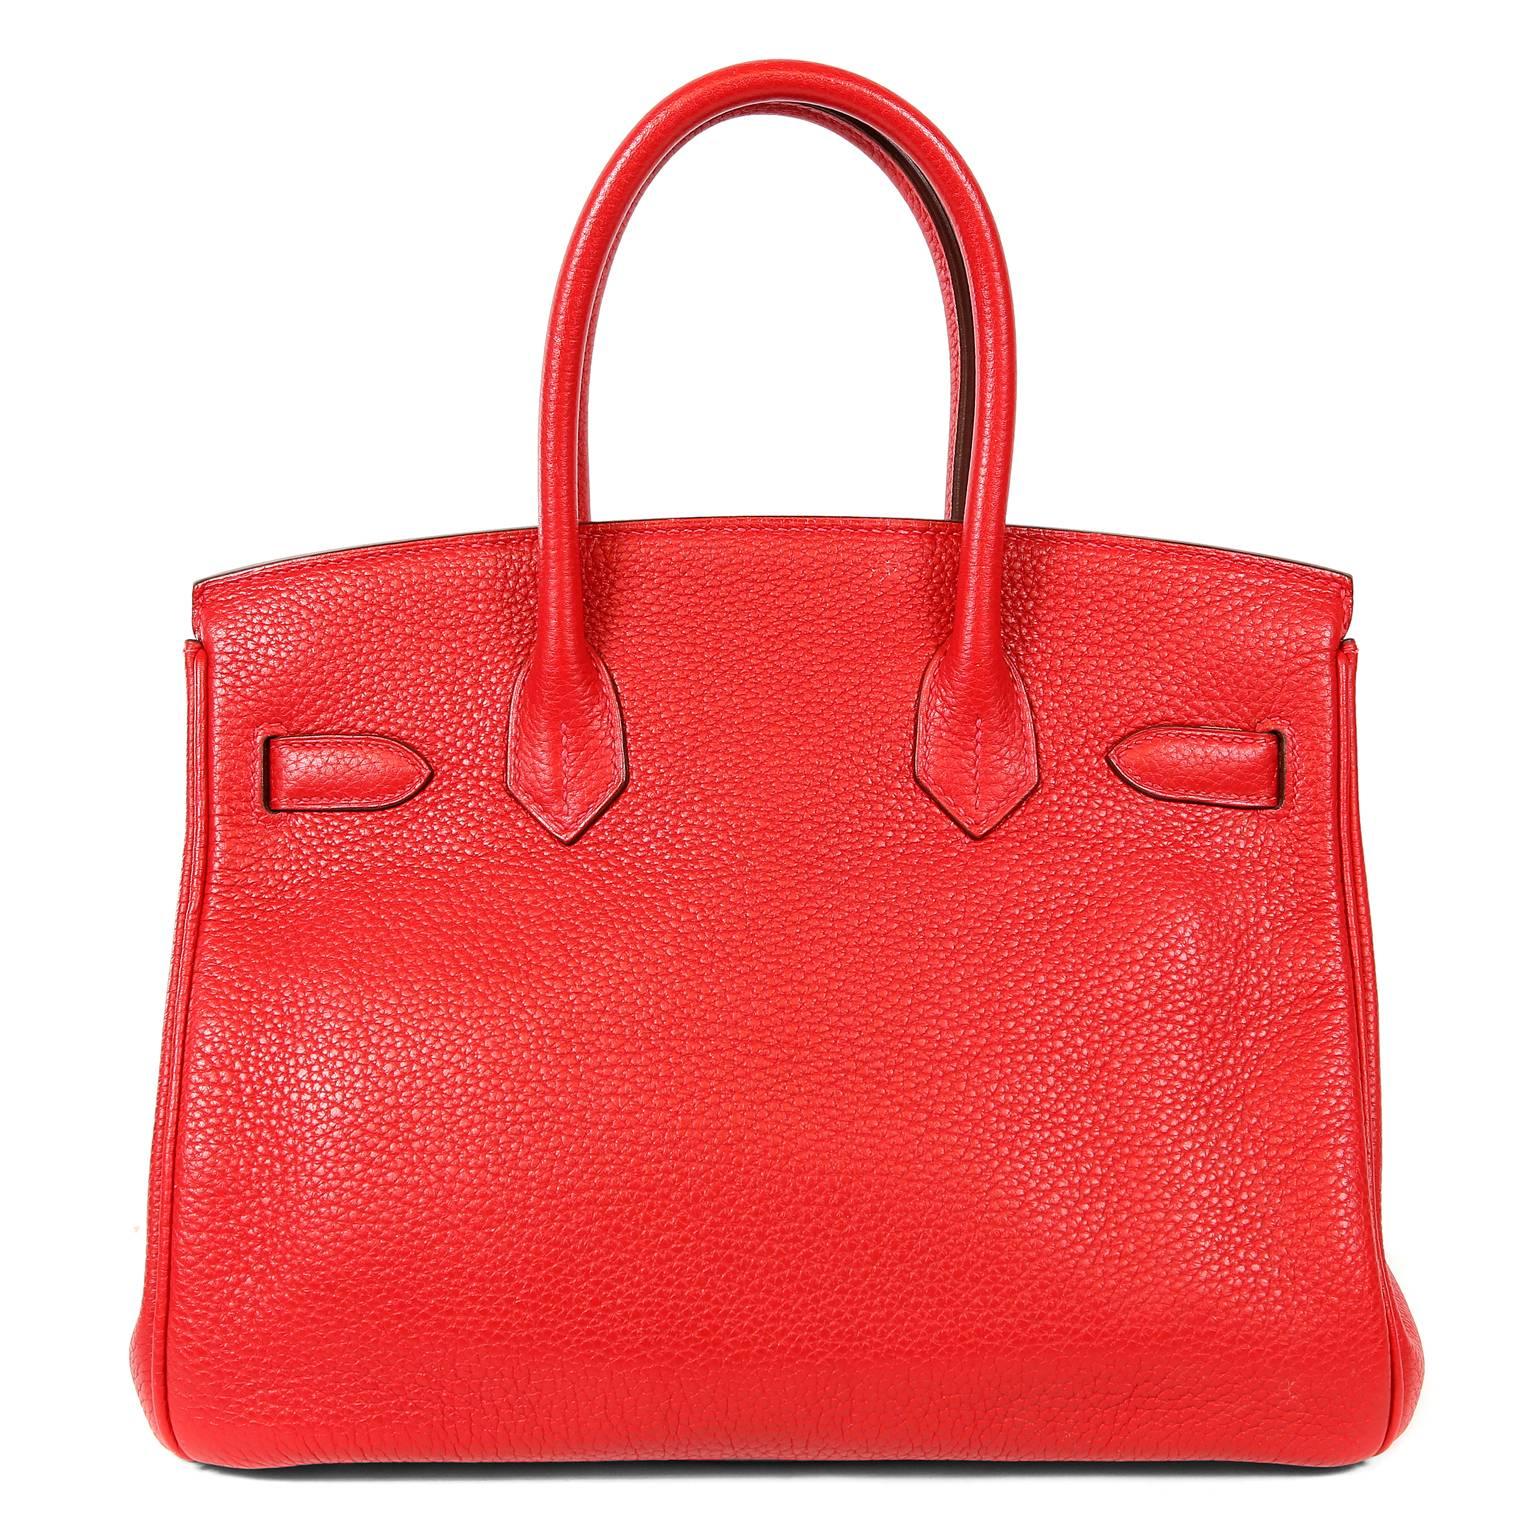 Hermès Rouge H Togo 30 cm Birkin- Pristine overall condition
Hand stitched by skilled craftsmen, wait lists of a year or more are not uncommon for the Hermès Birkin. They are considered the ultimate in luxury fashion.
Togo is highly desirable